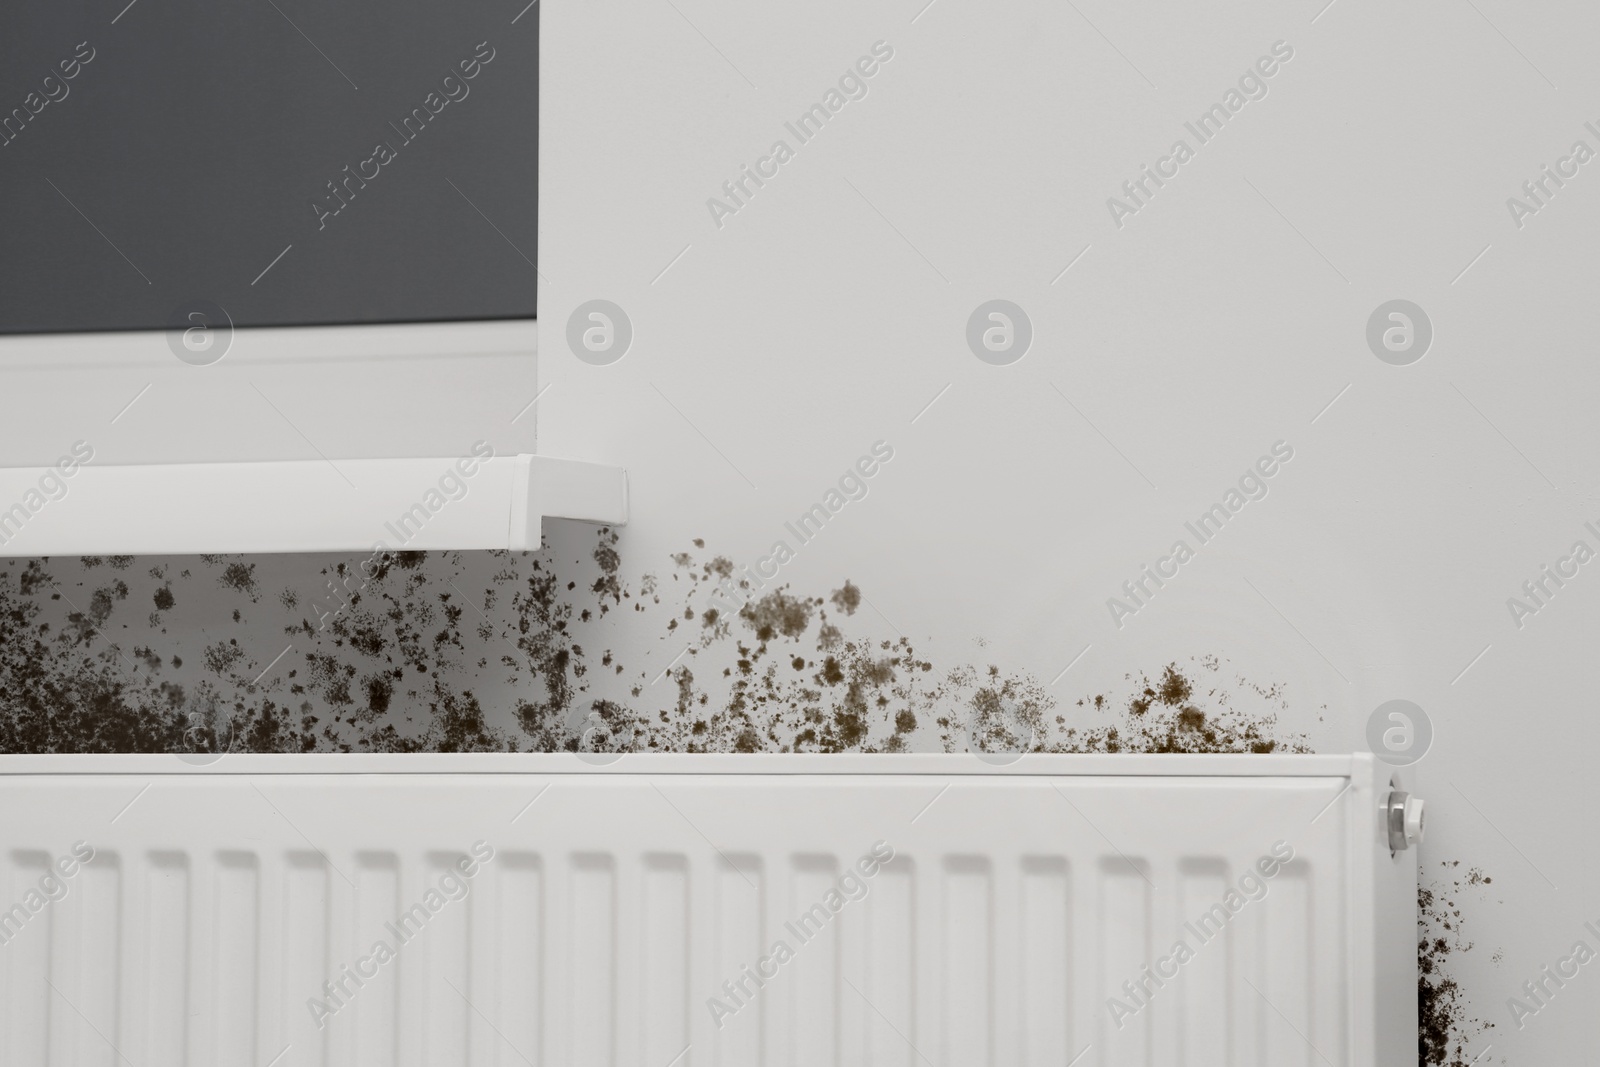 Image of Mold around panel radiator on wall in room